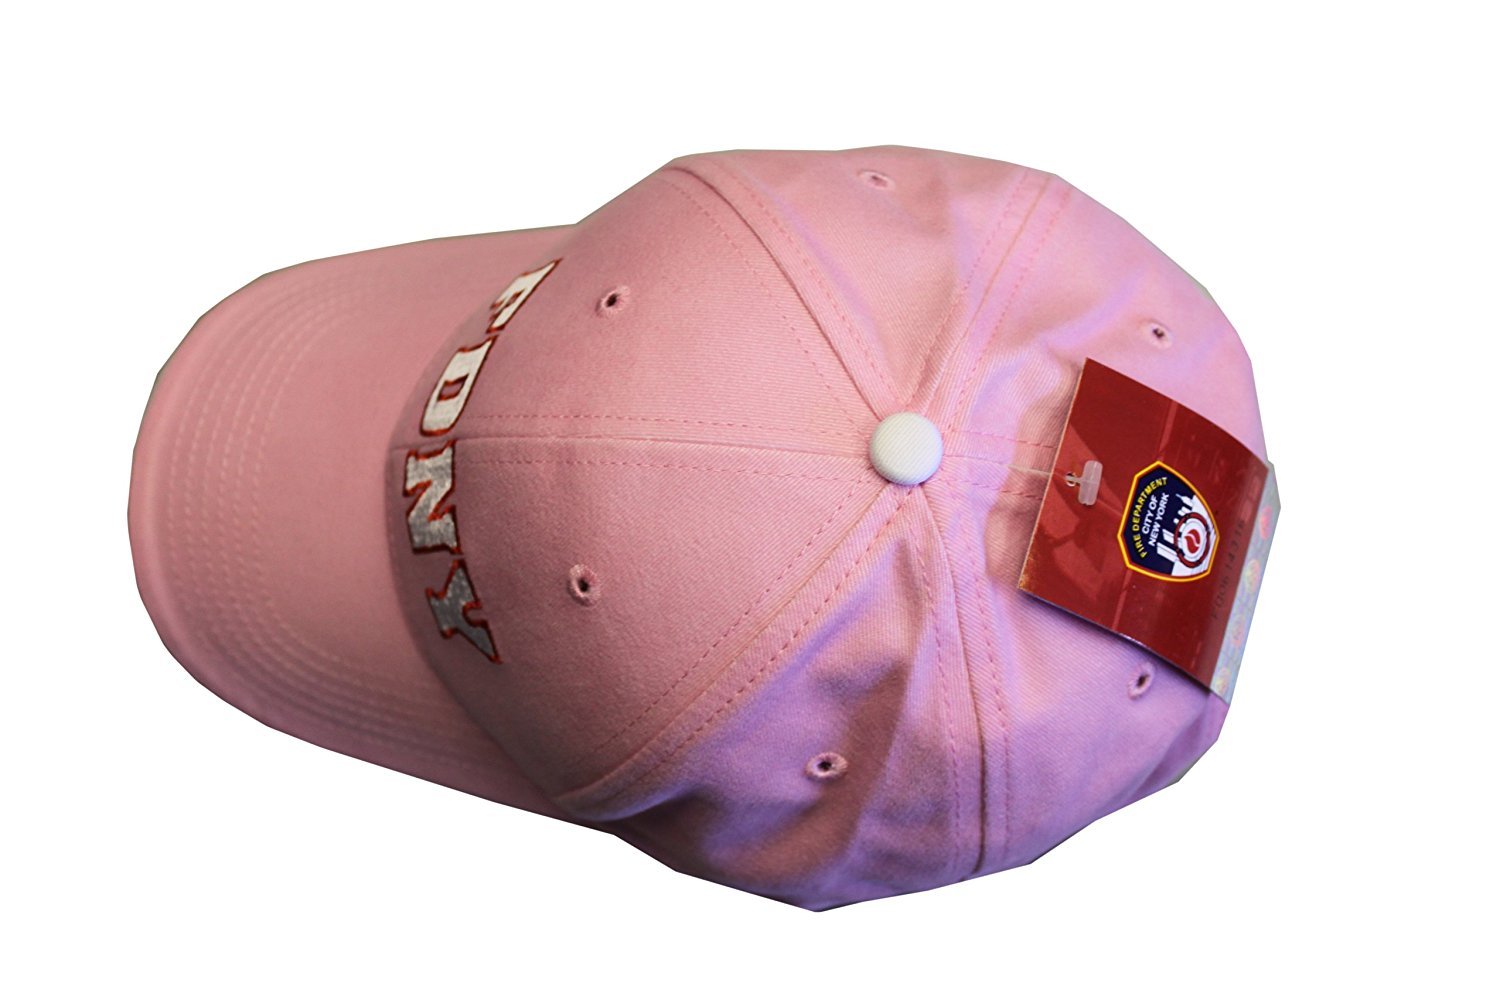 FDNY Baseball Hat Fire Department Of New York City Pink & White One Size